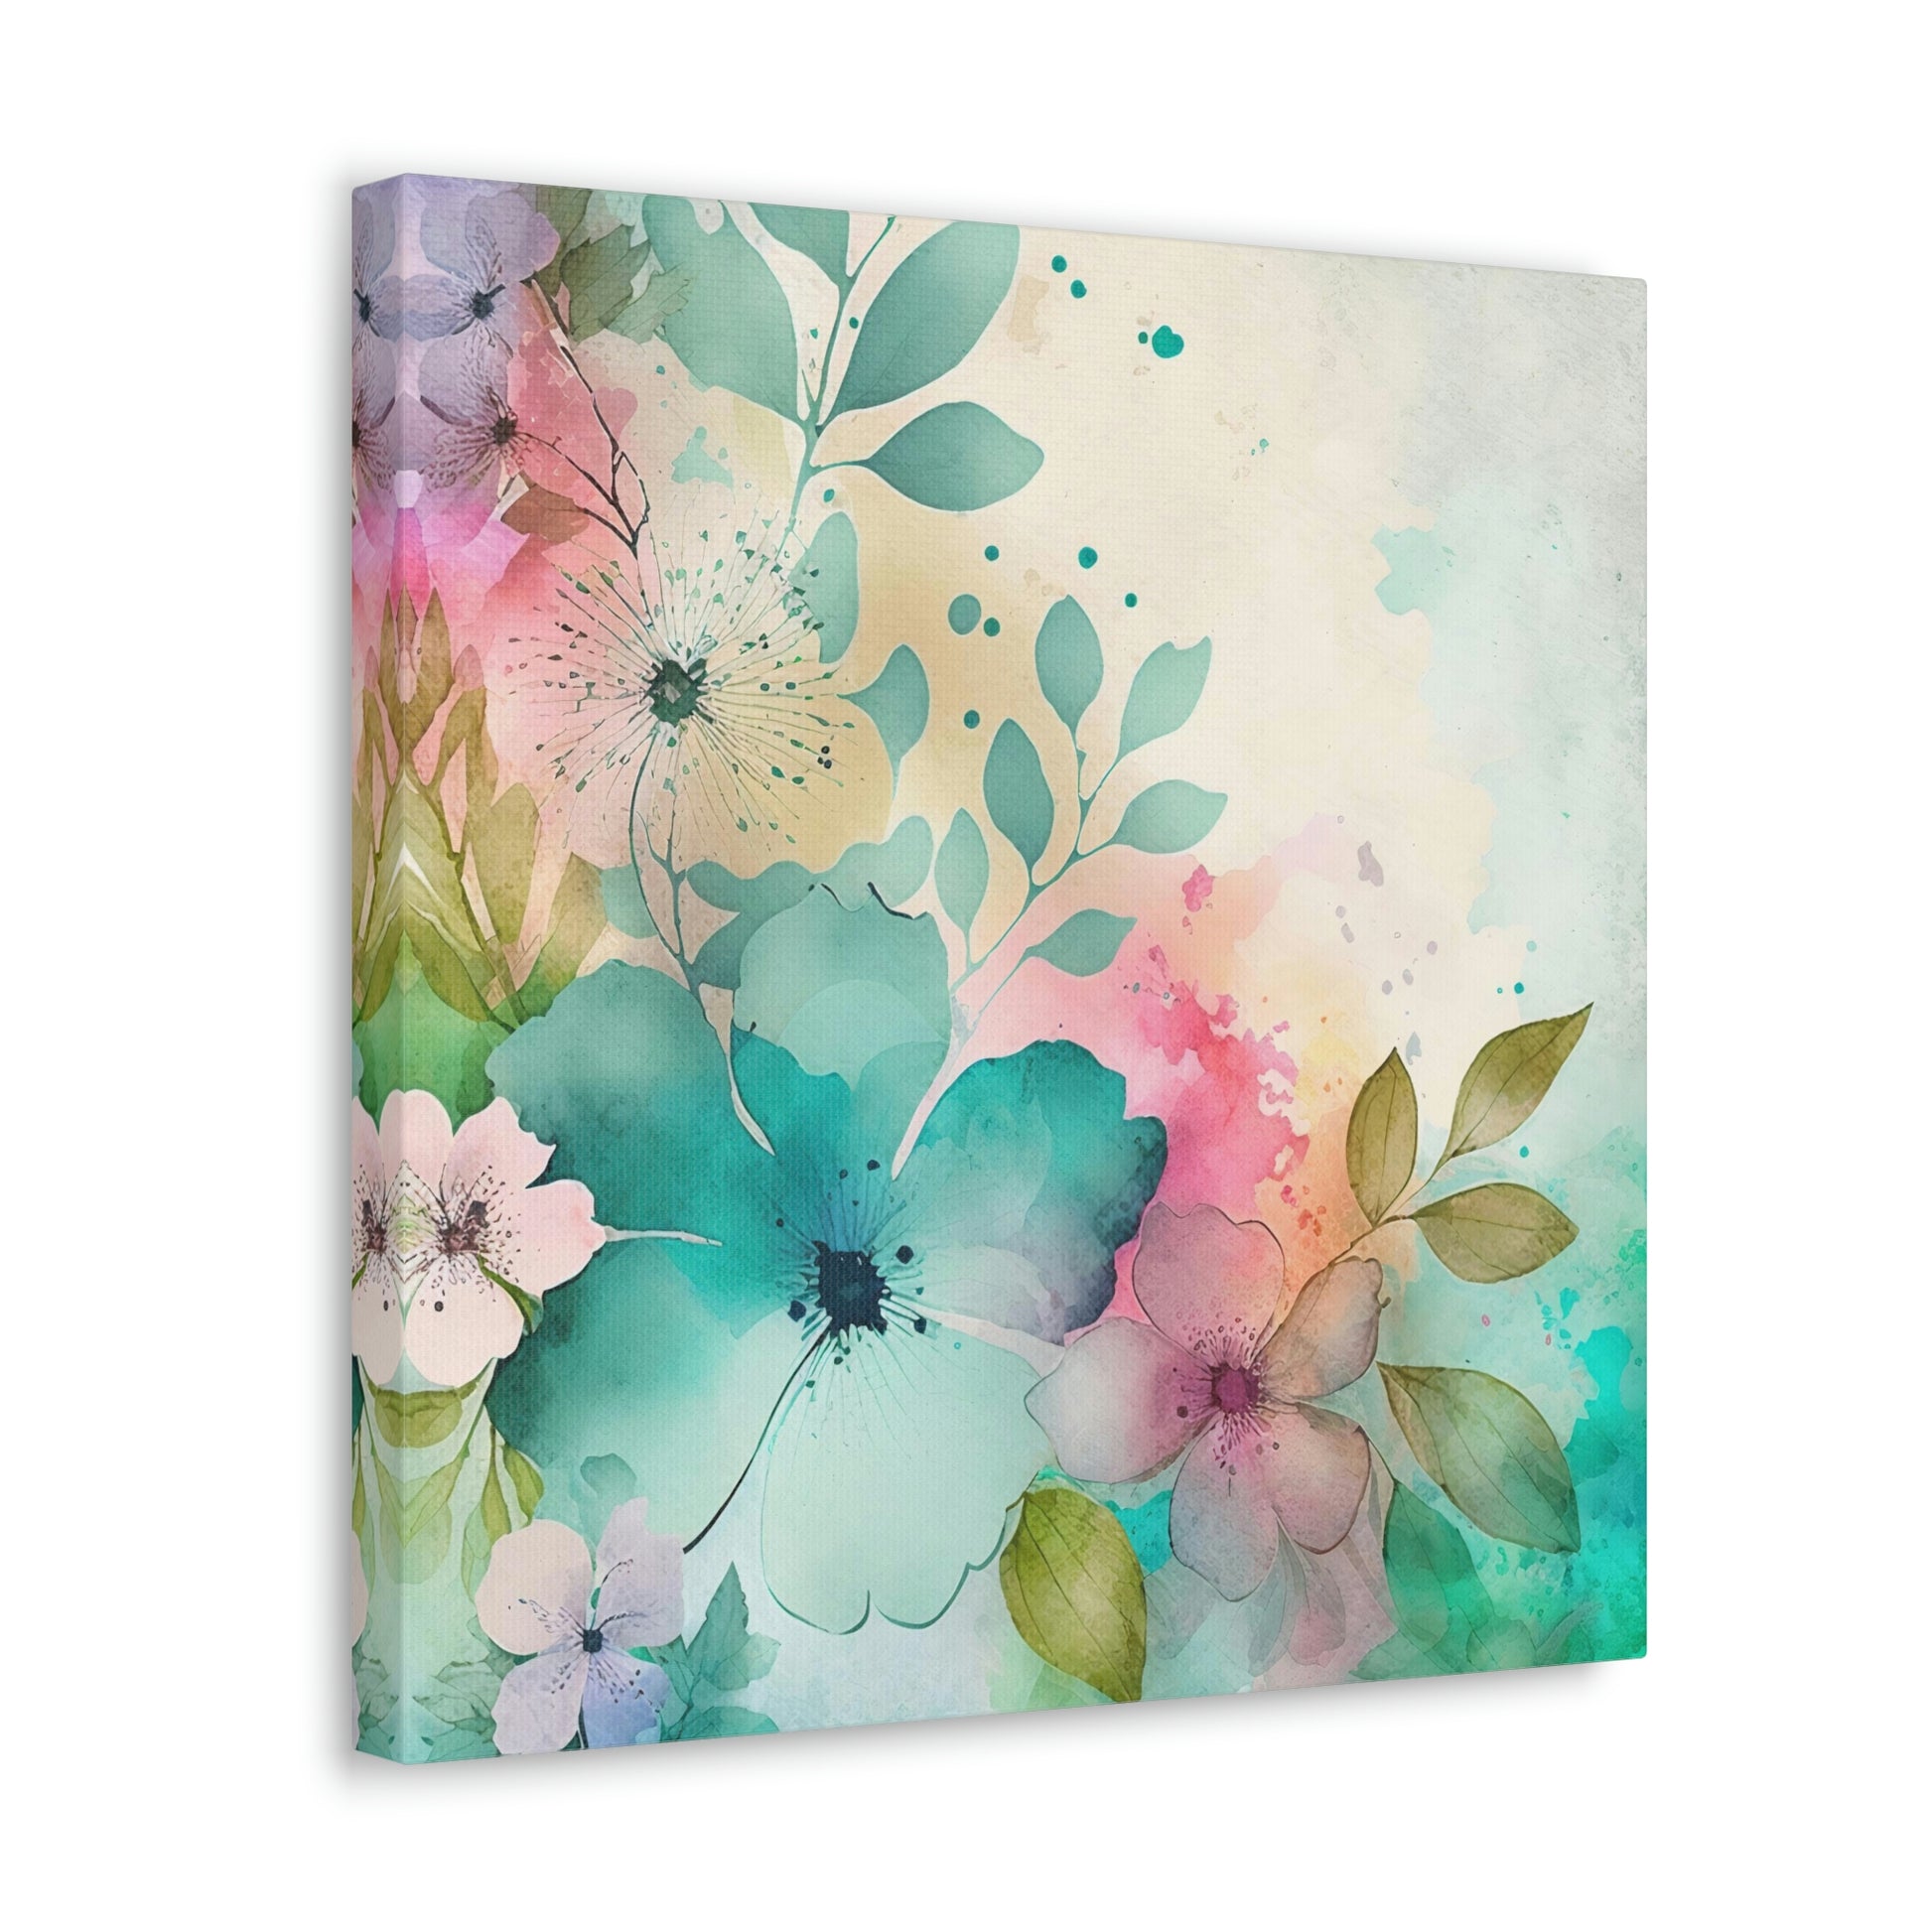 pink and blue floral canvas art, watercolor floral wall decor on canvas 